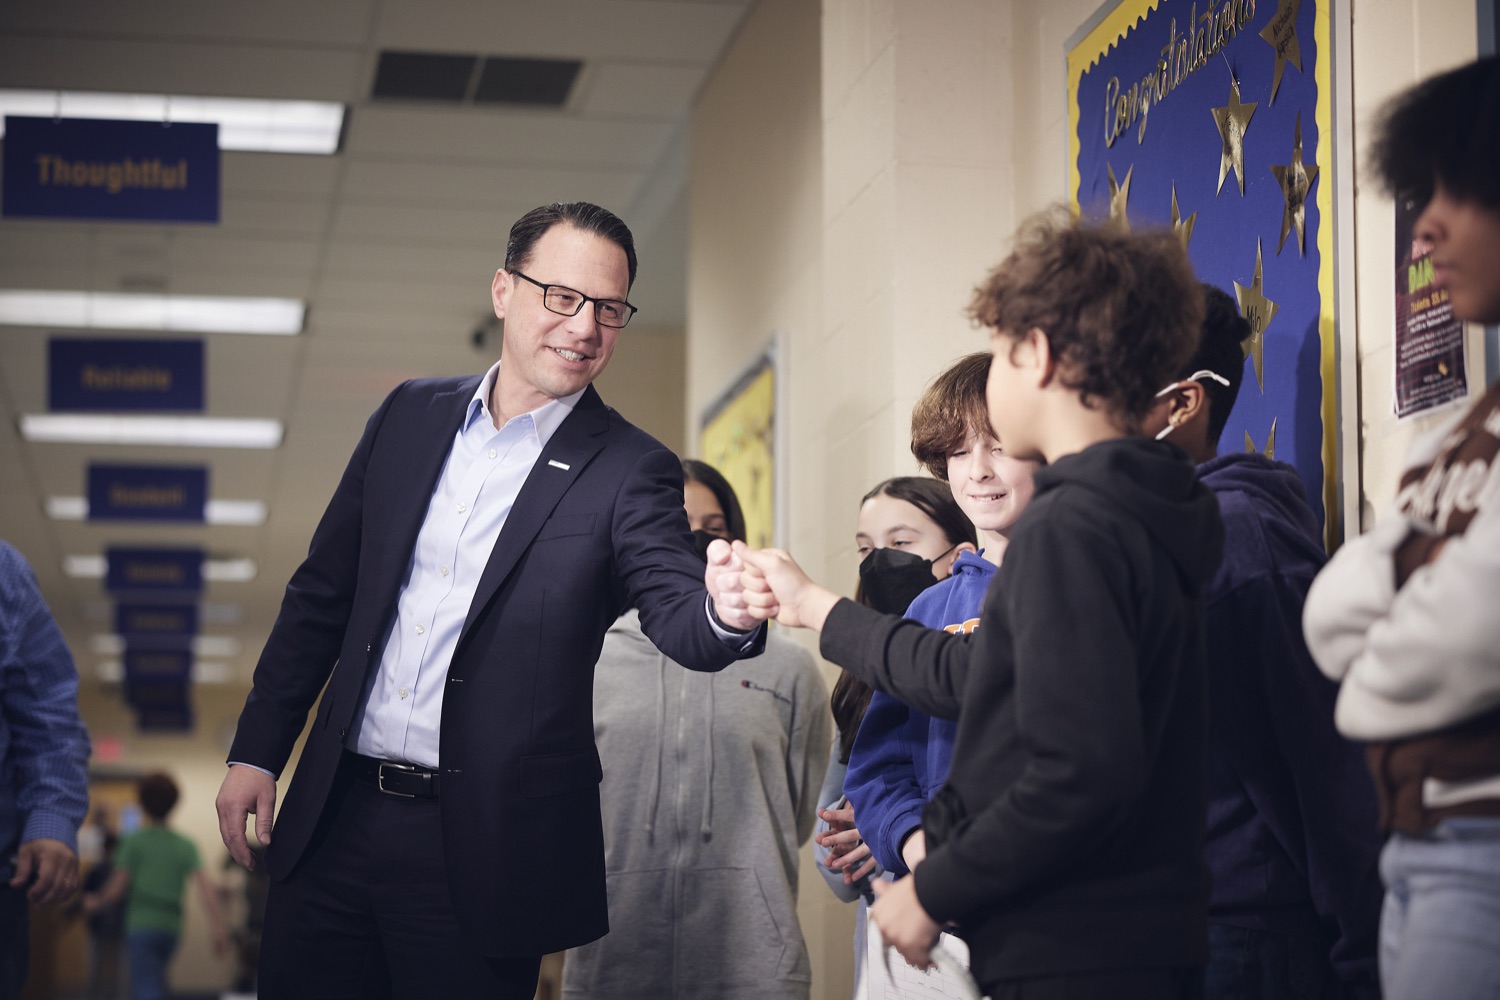 Pennsylvania Governor Josh Shapiro spends time working with Colfax students.  Governor Josh Shapiro today shared his plans for rebuilding Pennsylvanias teacher workforce and making our schools better, healthier, and safer for Pennsylvania students during a visit to Pittsburgh Colfax K-8.  MARCH 21, 2023 - PITTSBURGH, PA<br><a href="https://filesource.amperwave.net/commonwealthofpa/photo/22804_gov_workforceTeachers_dz_0011.JPG" target="_blank">⇣ Download Photo</a>